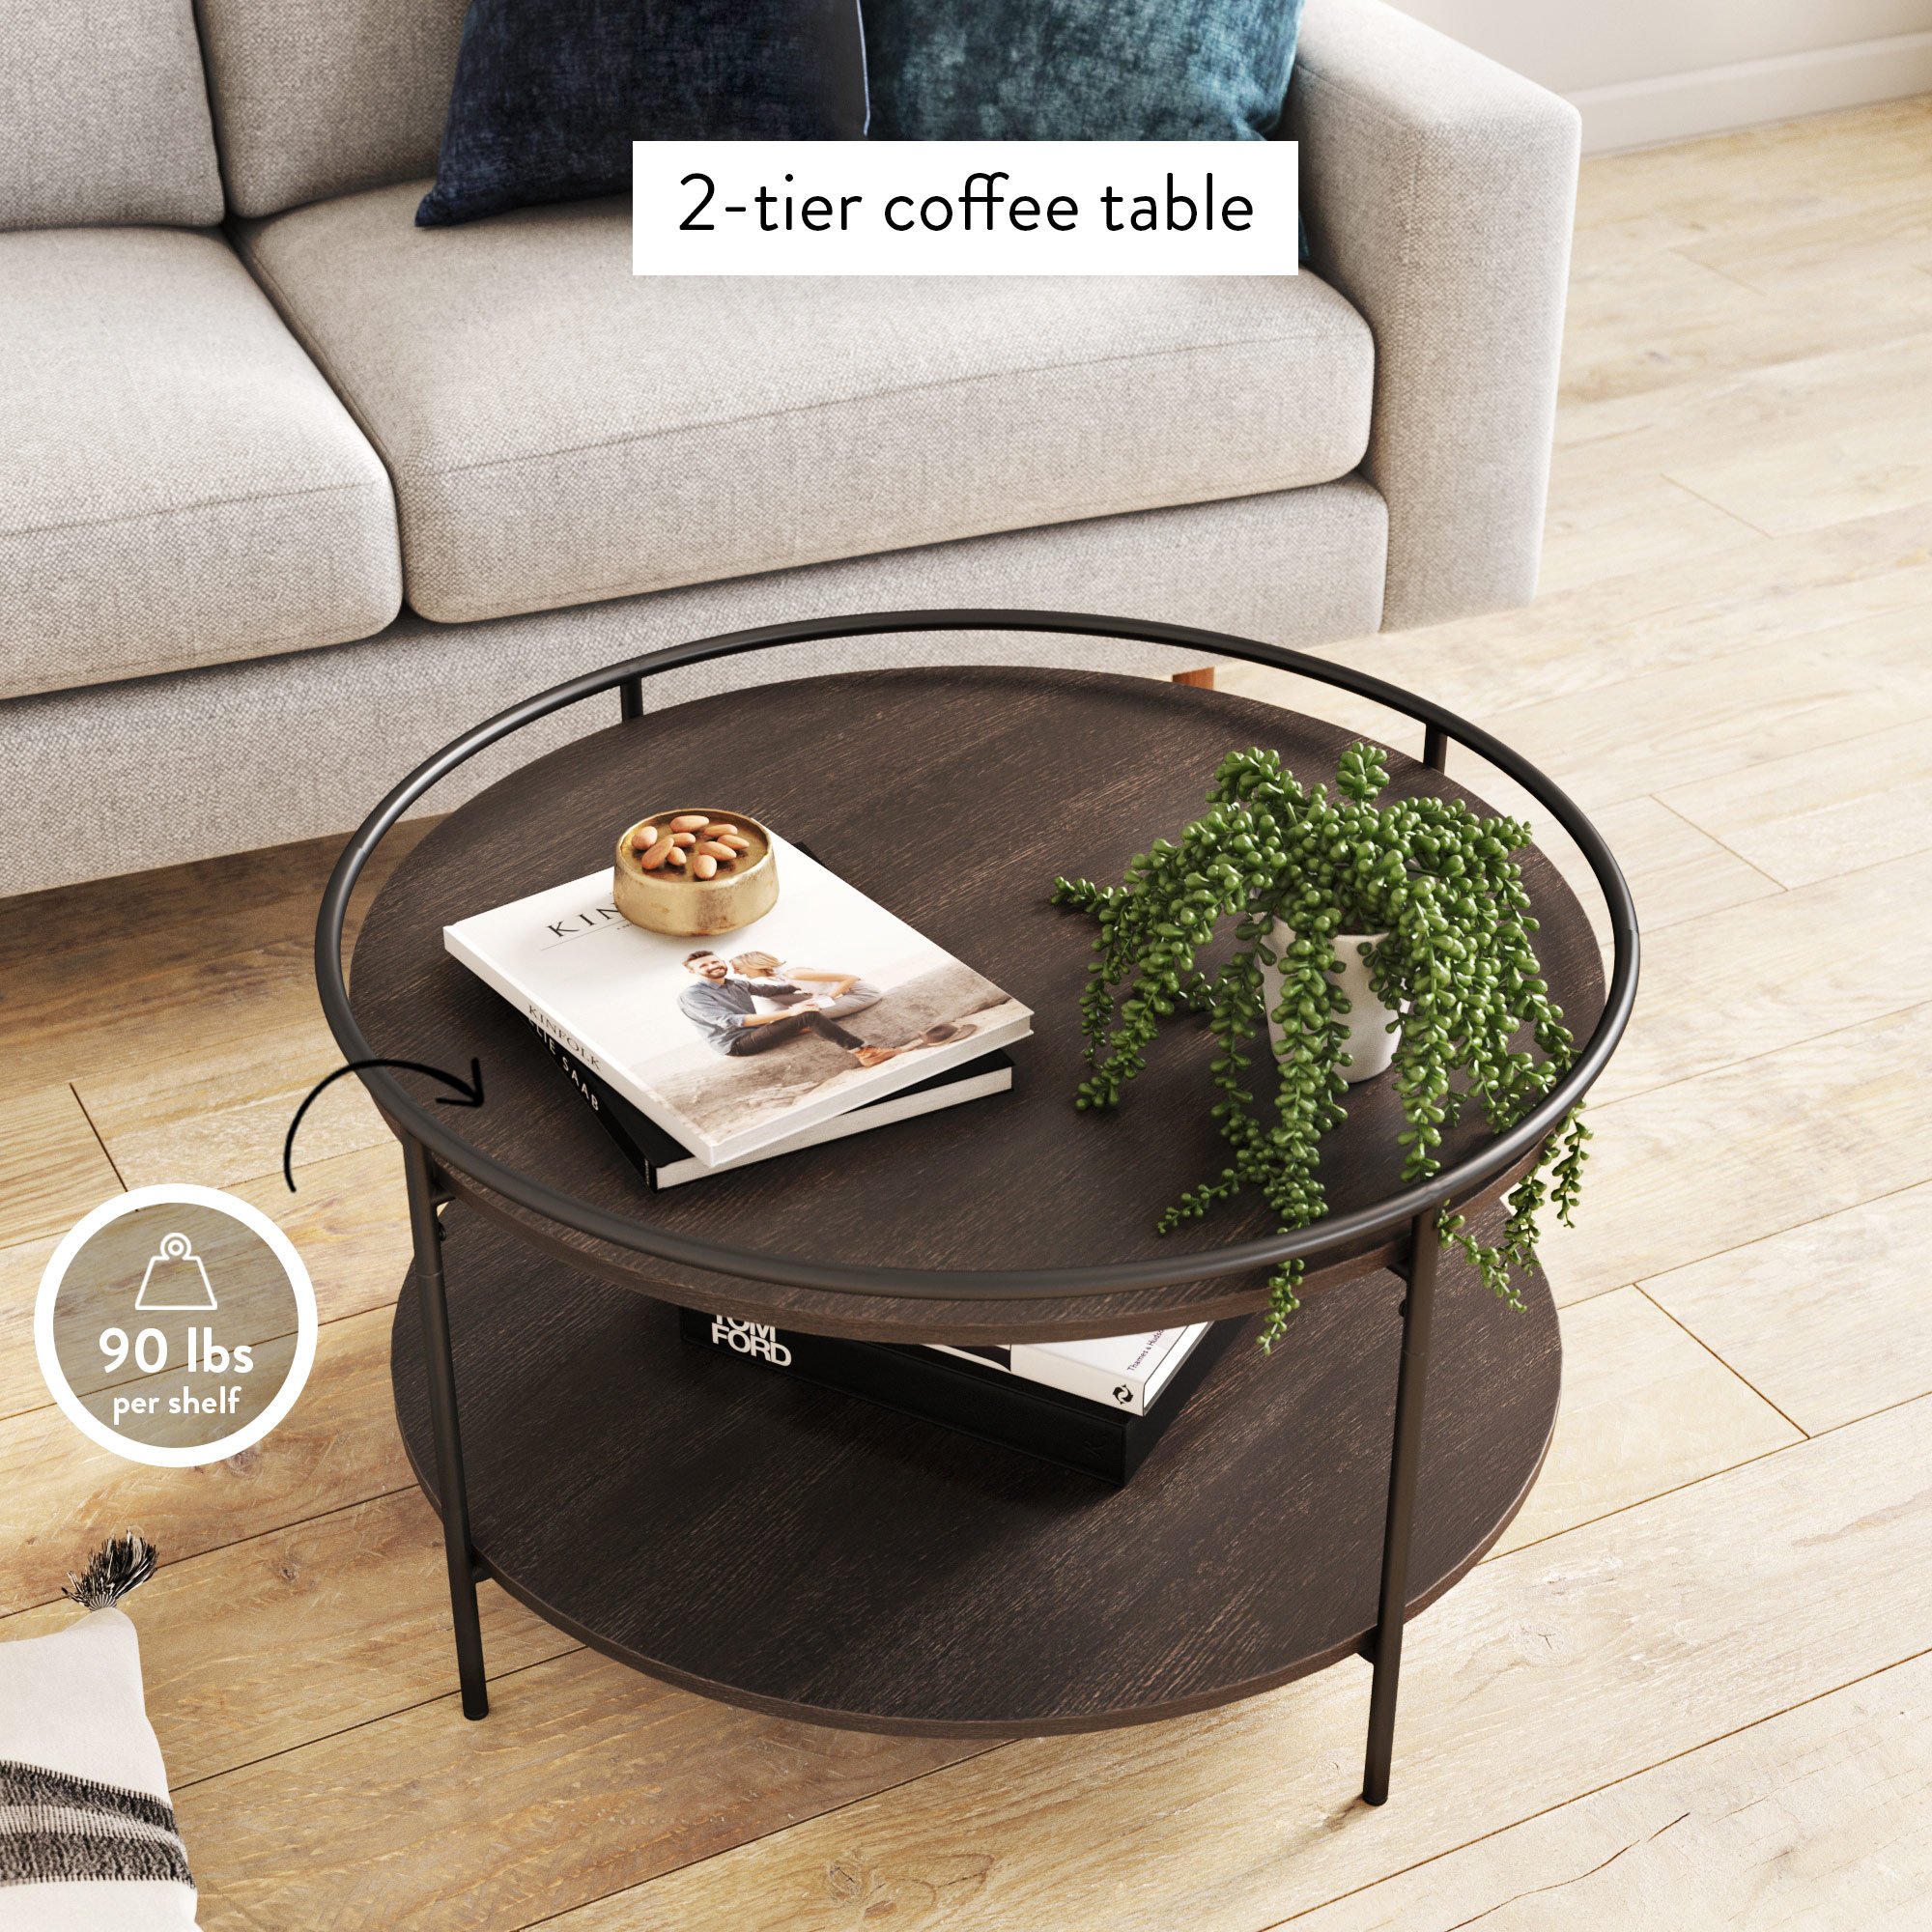 Nathan James Paloma Round Coffee Table for Tea or Cocktail 2-Tier Minimalist Tray Top Edge, Dark Oak/Matte Black - image 3 of 7